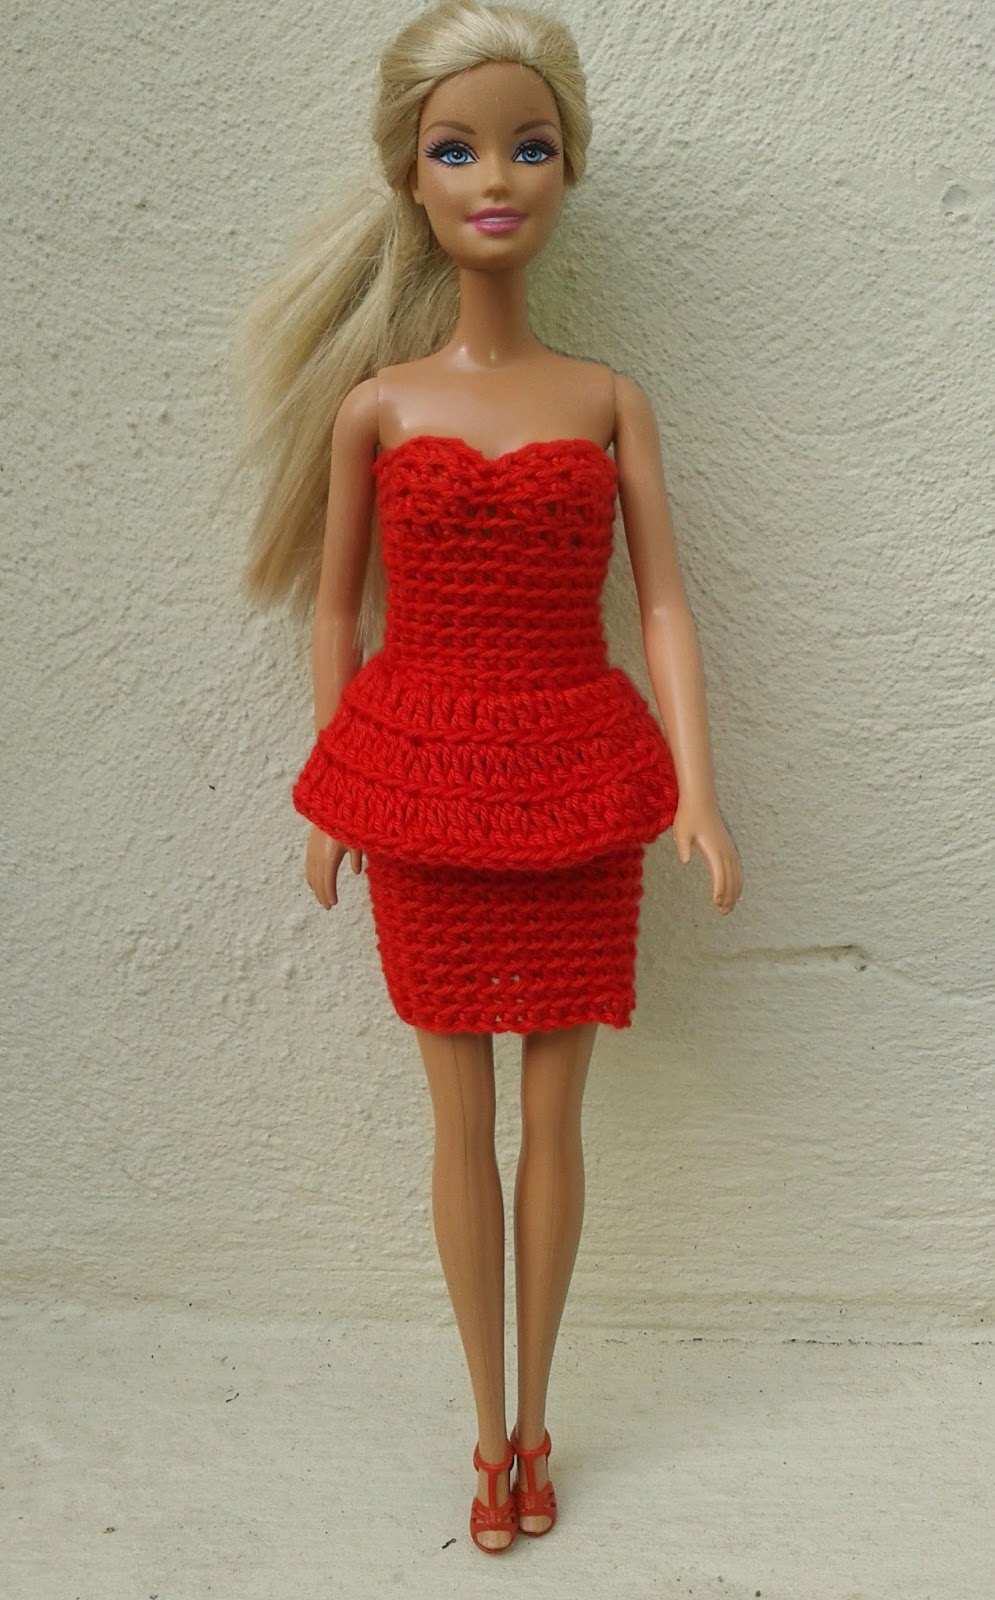 Crochet Doll Dress Patterns For Barbies Linmary Knits Barbie In Red Crochet Dresses